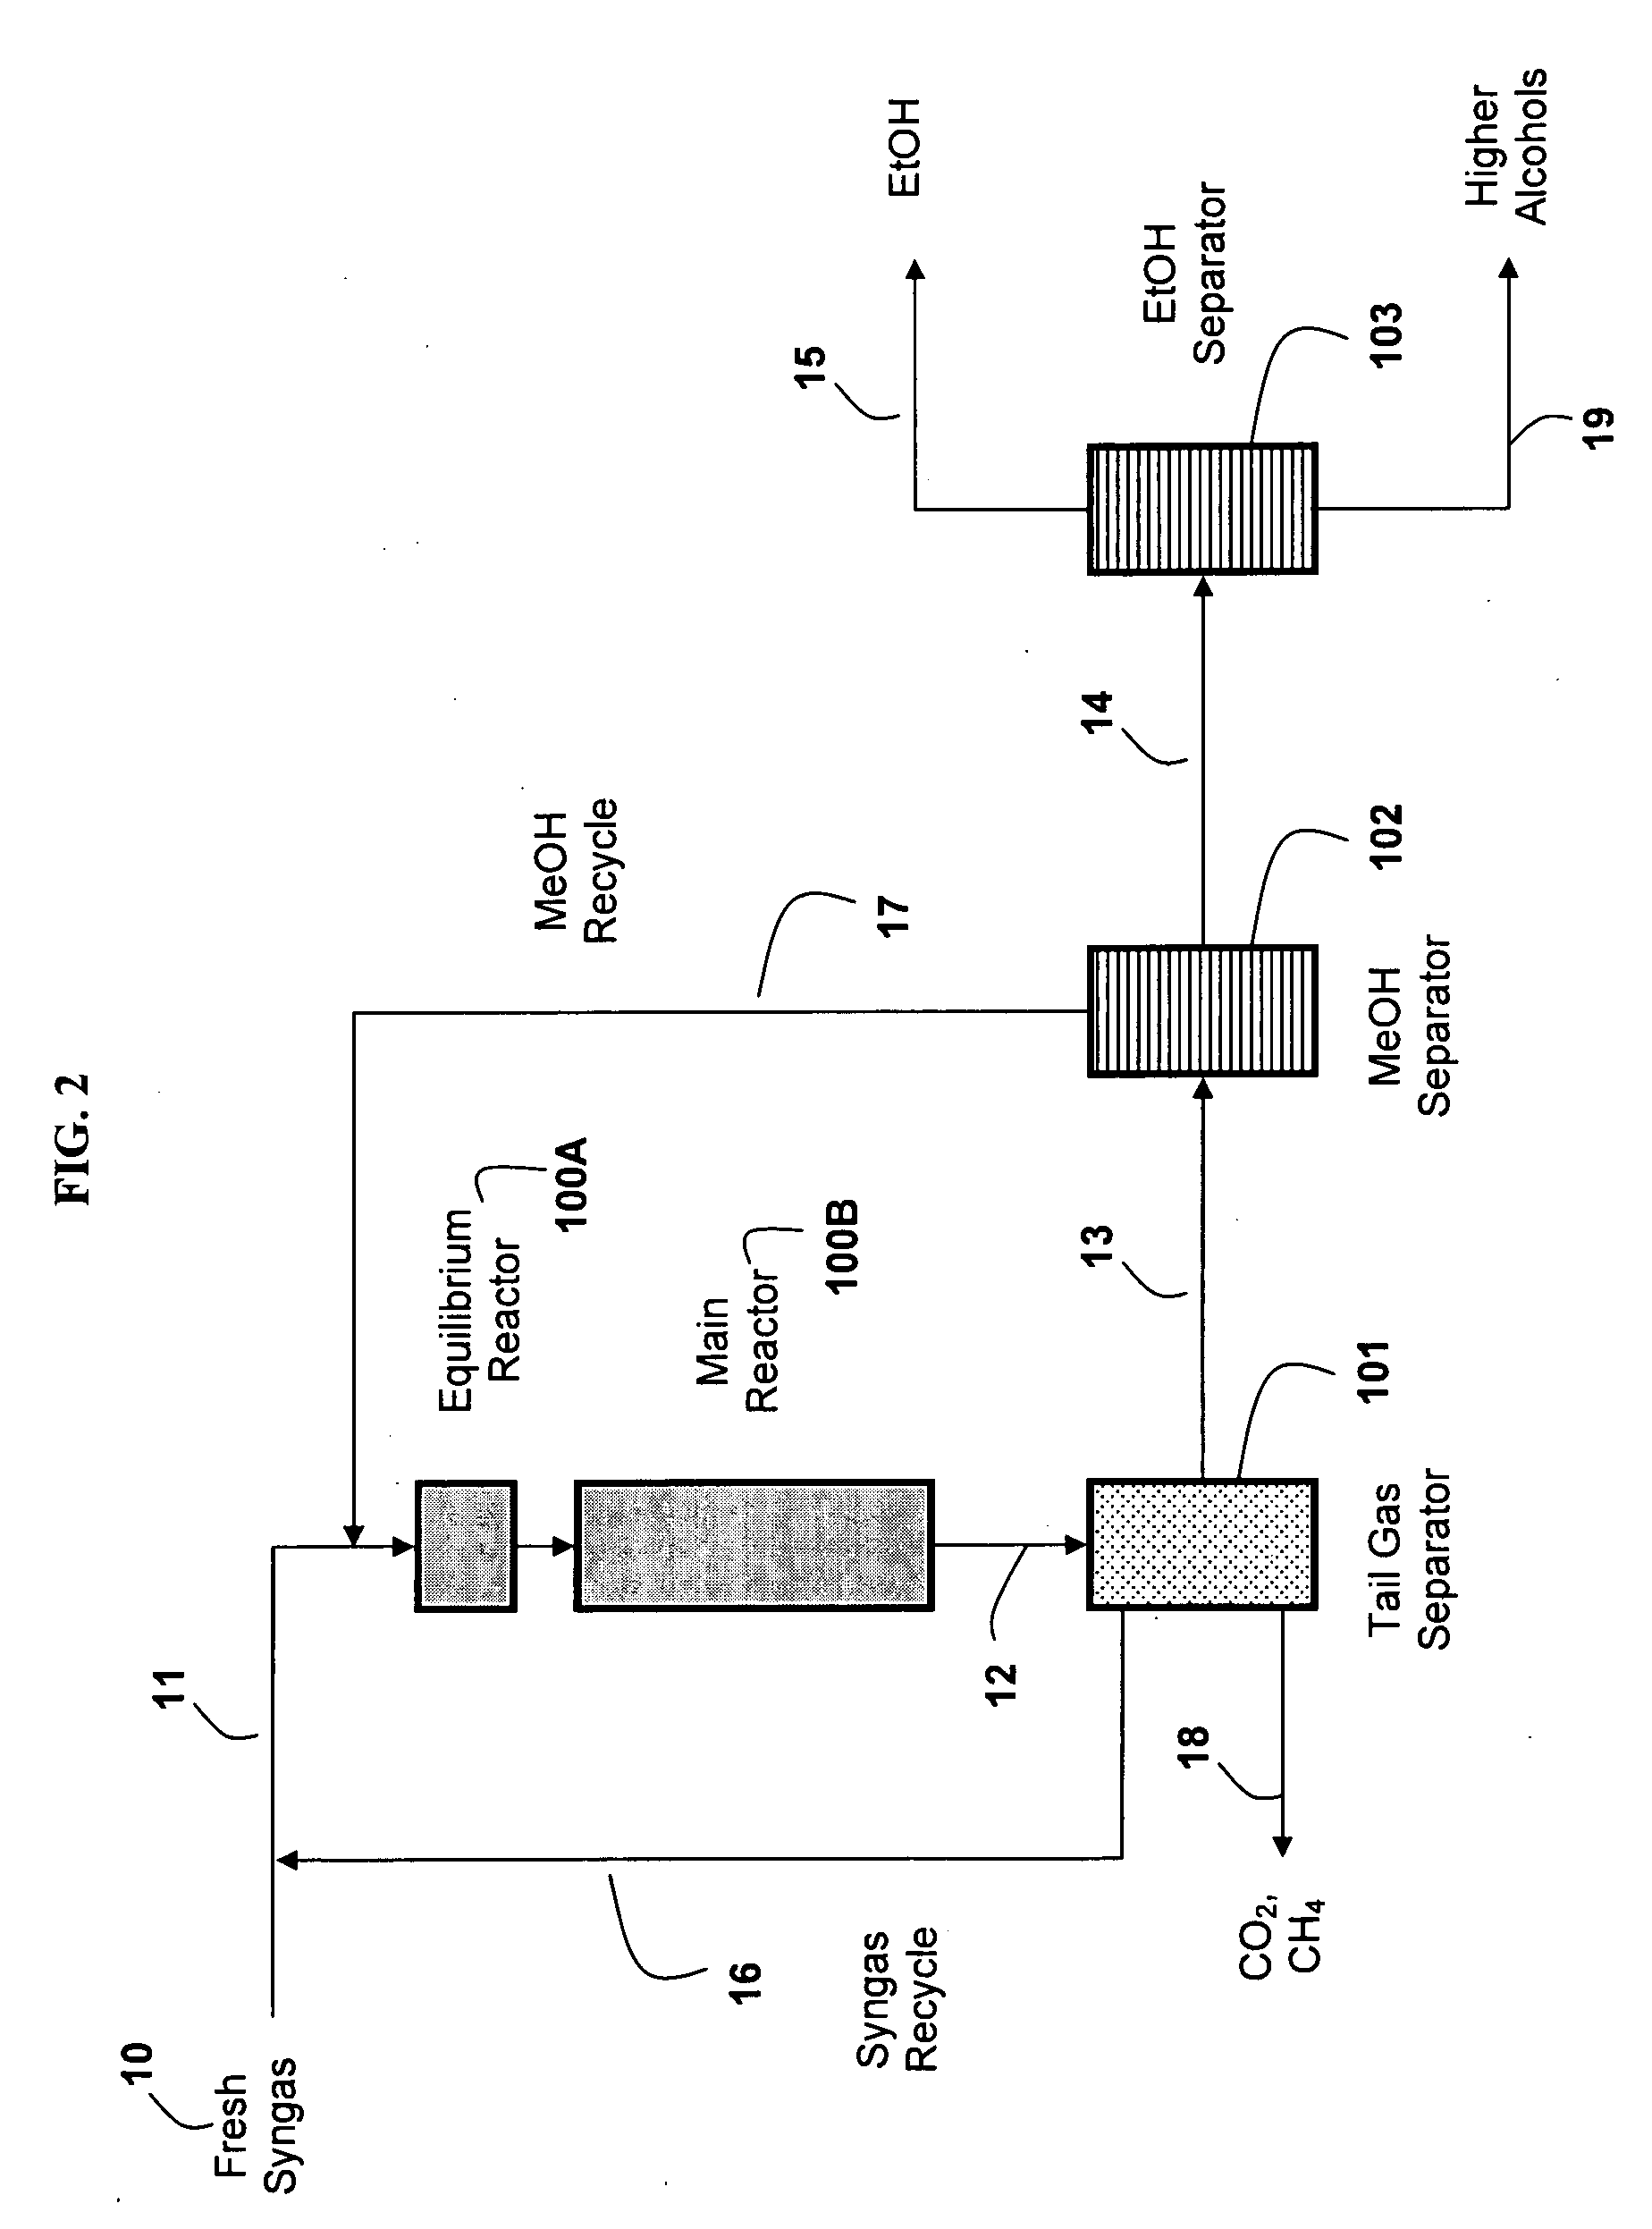 Methods and apparatus for producing ethanol from syngas with high carbon efficiency